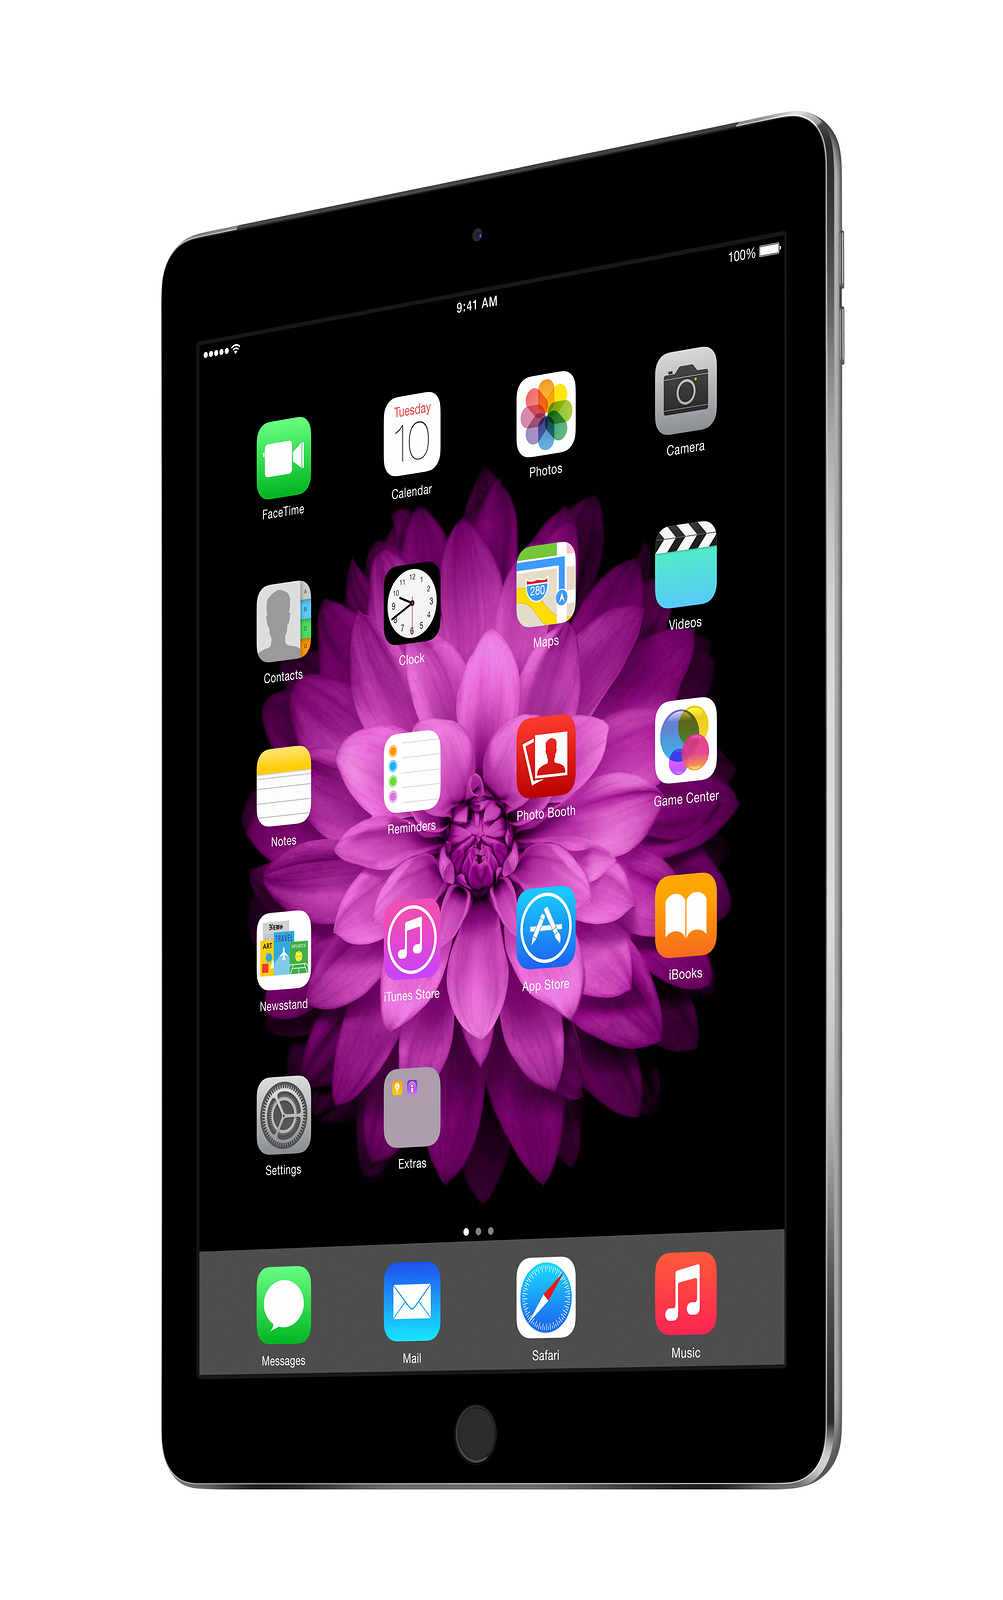 Apple Space Gray iPad Air 2 with iOS 8, designed by Apple Inc.